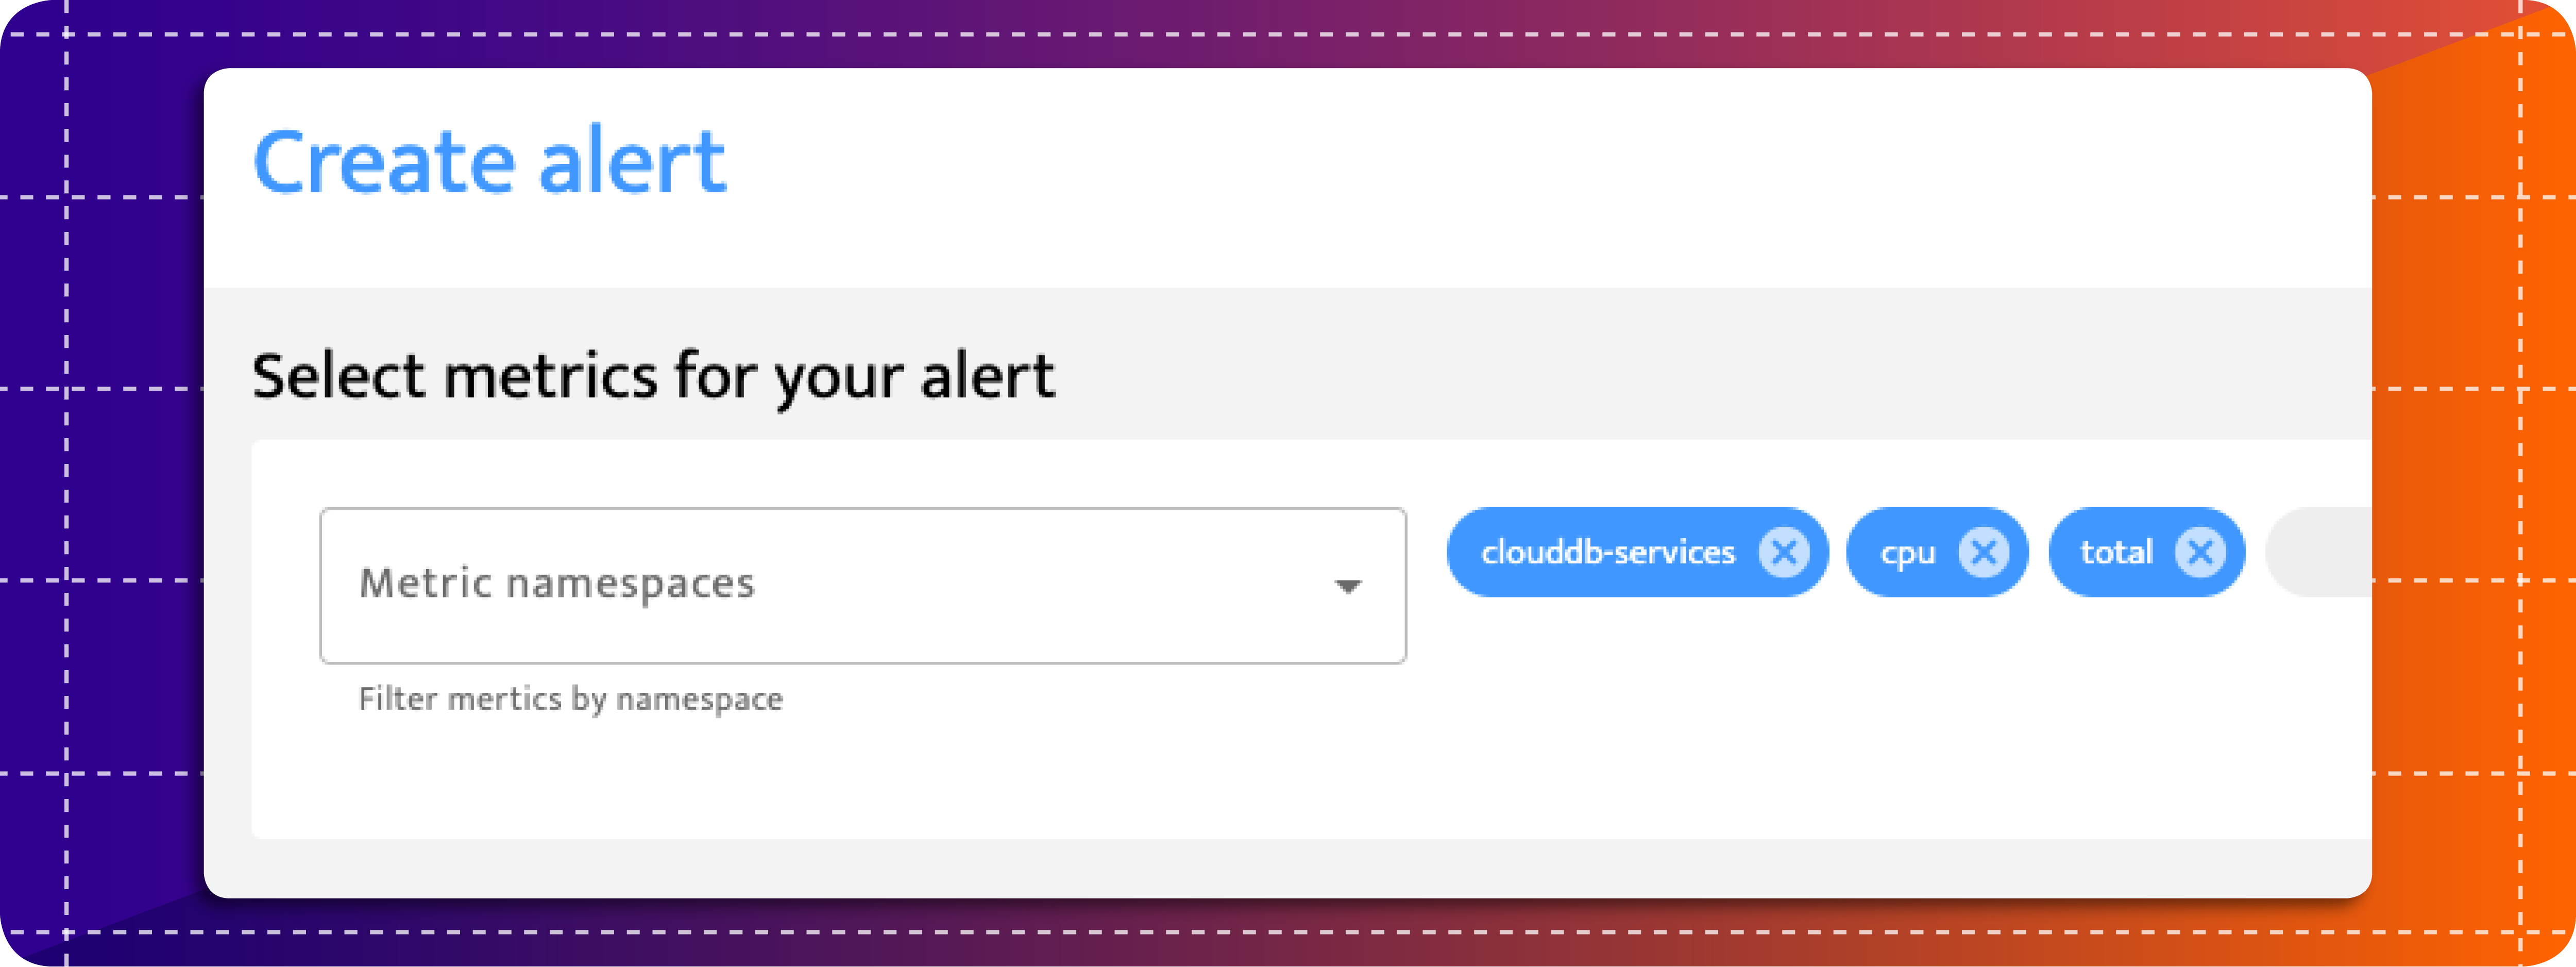 Select metric namespaces for your alert